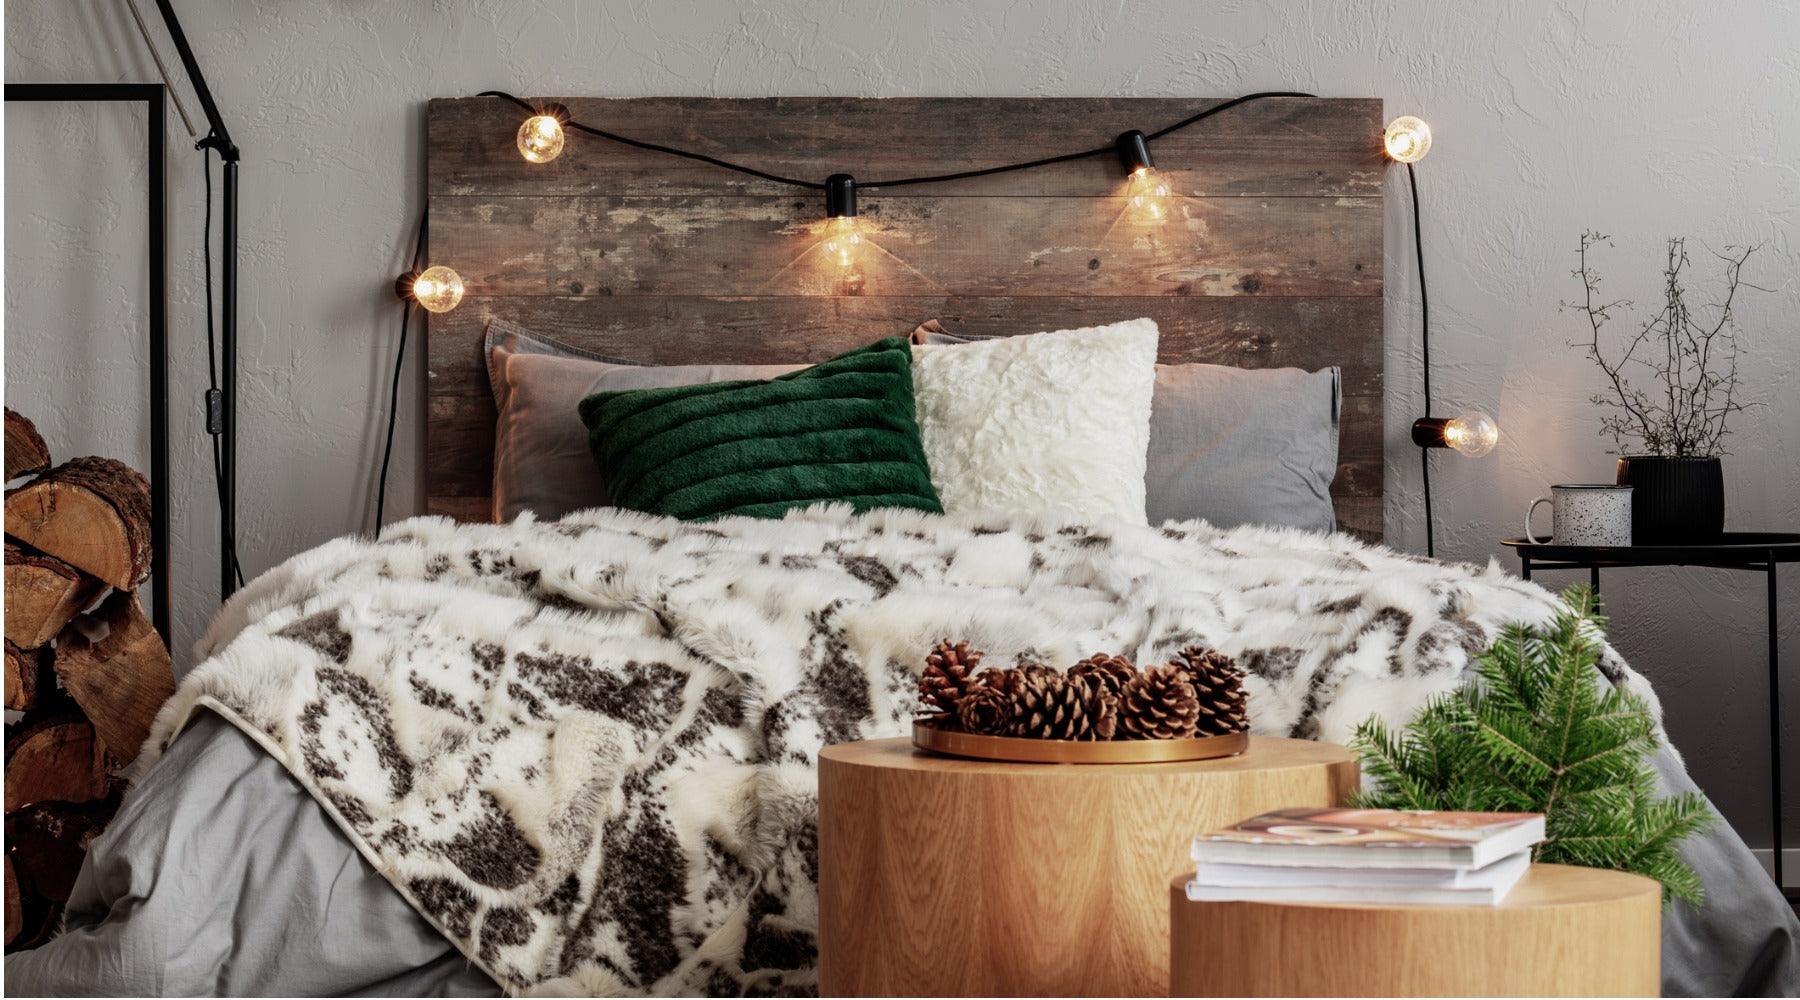 How To Winterize Your Bedroom